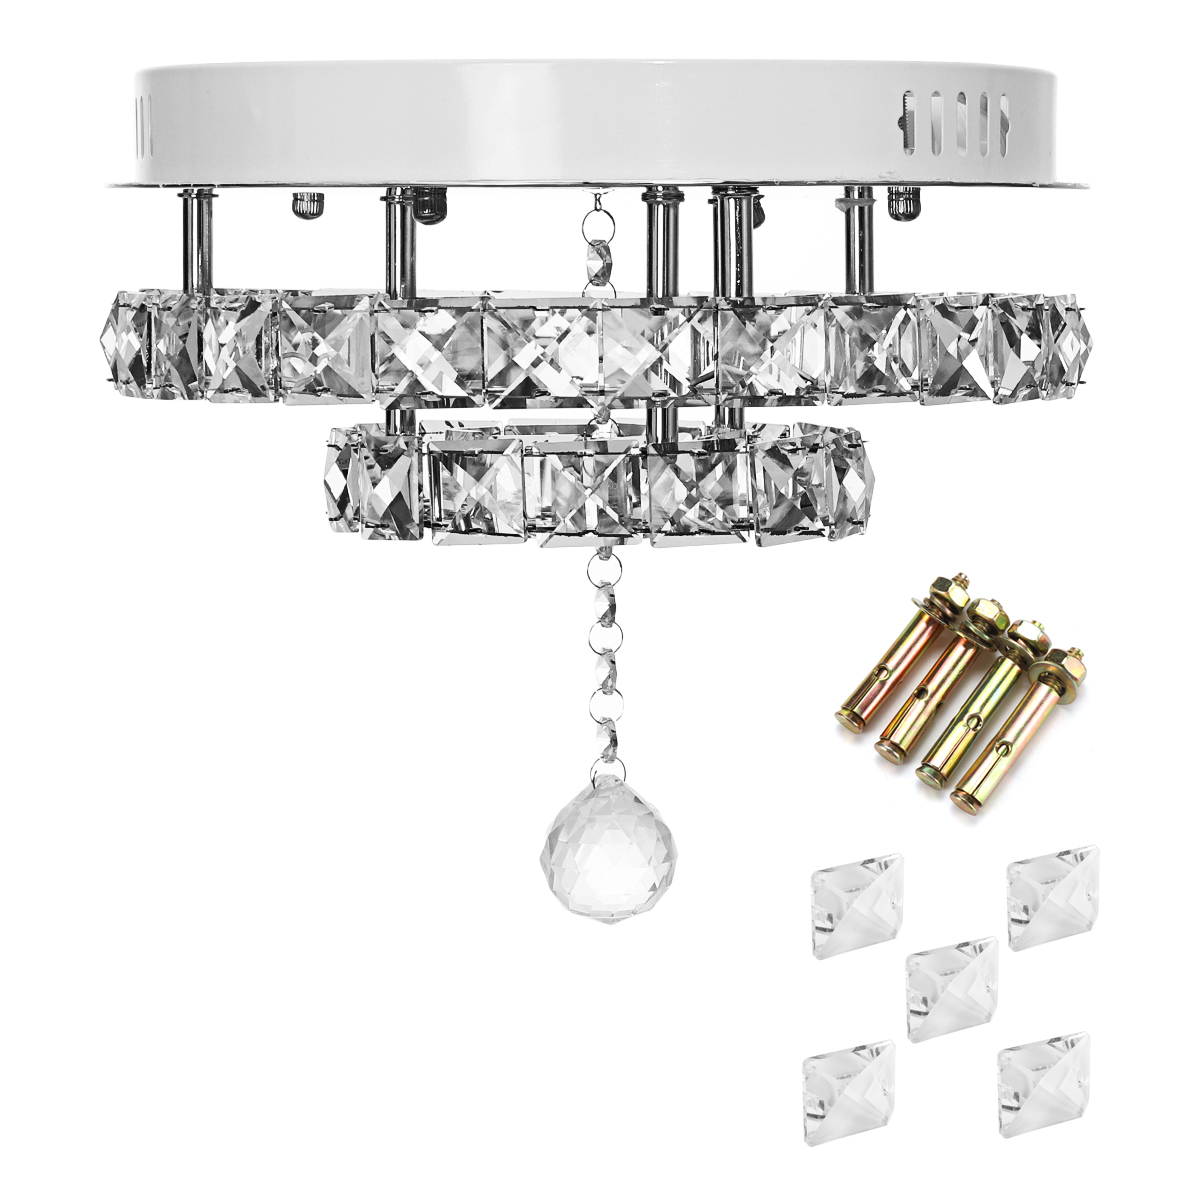 SINGES 2 Rings Modern Crystal Ceiling Light Flush Mounted, 12 inch LED Chandelier Pendant Linghting Fixtures Home Decor - image 5 of 6